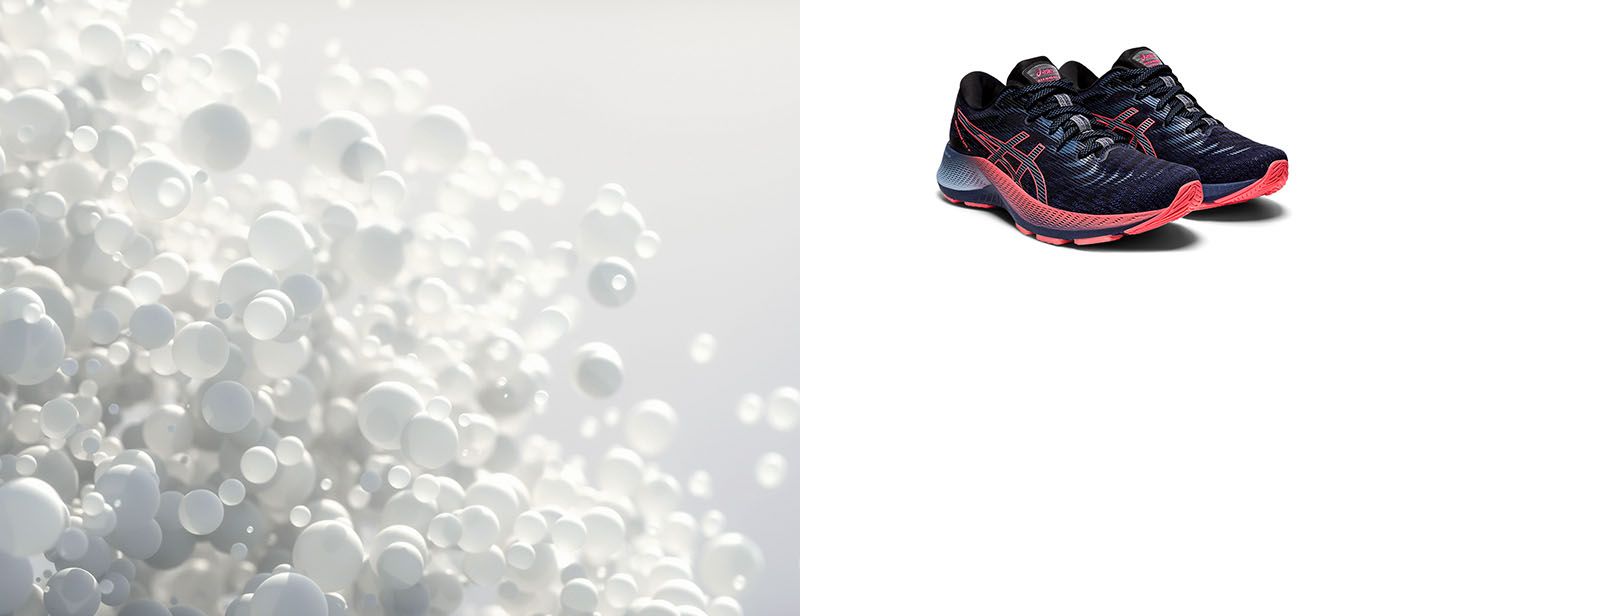 Representational image of PET bottle pellets and a pair of ASICS sneakers.